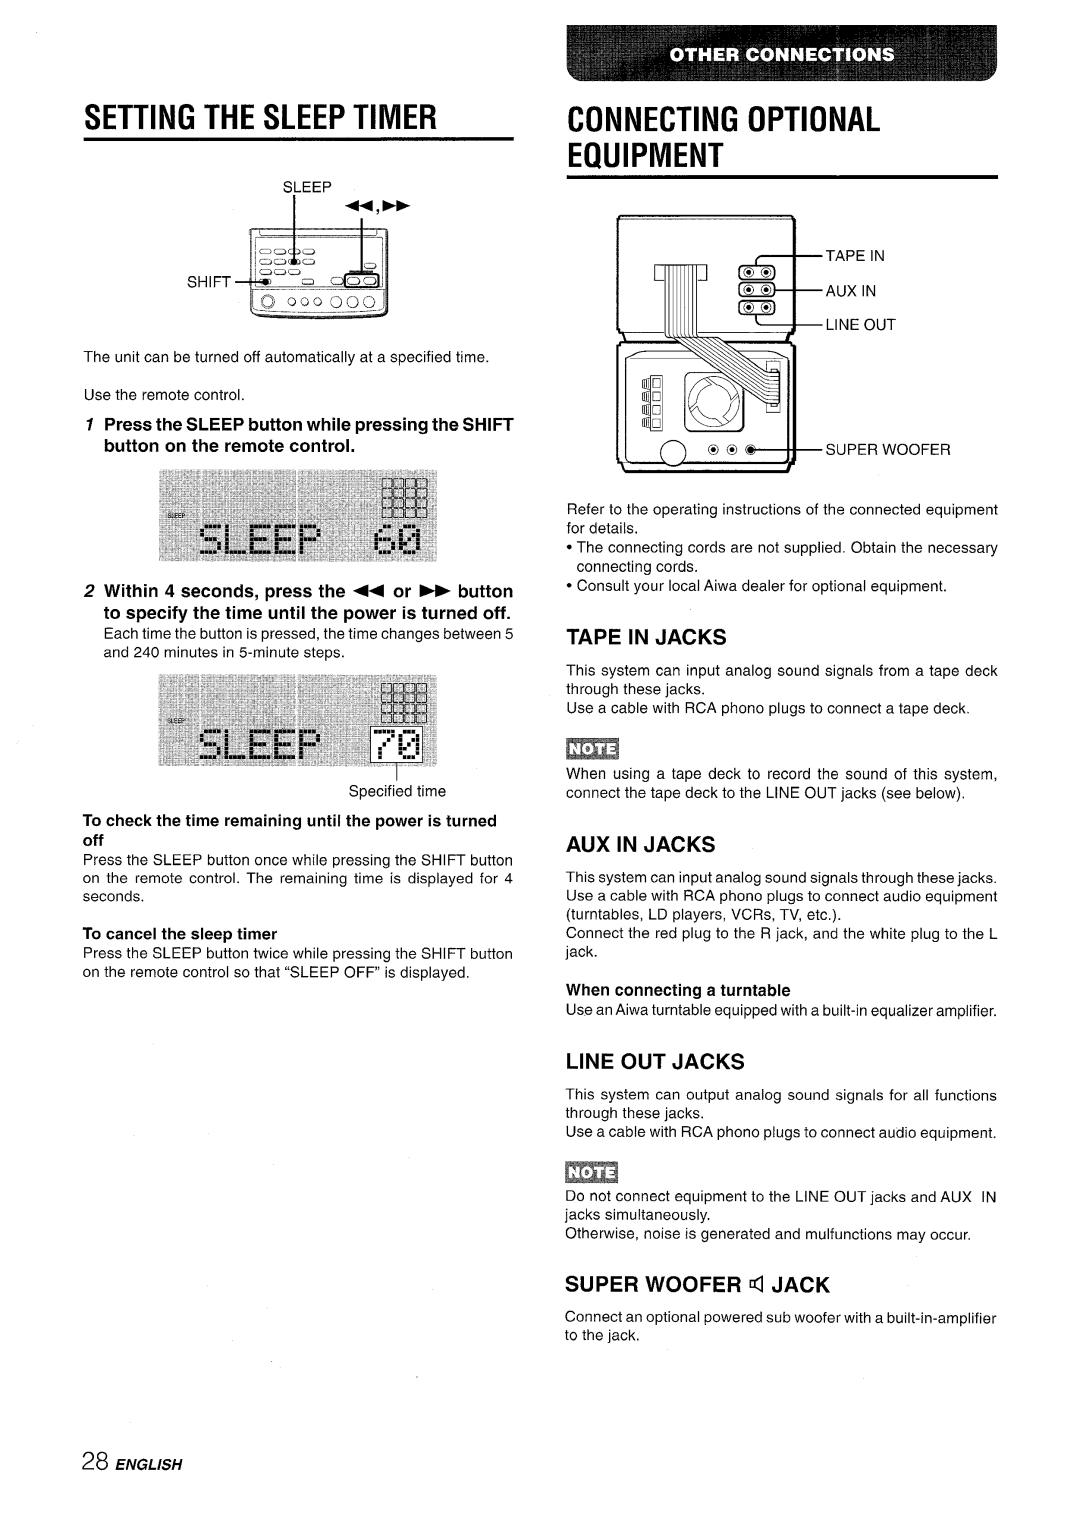 Aiwa XR-MD95 manual Setting The Sleep Timer, Connecting Optional Equipment, Tape In Jacks, Aux In Jacks, Line Out Jacks 